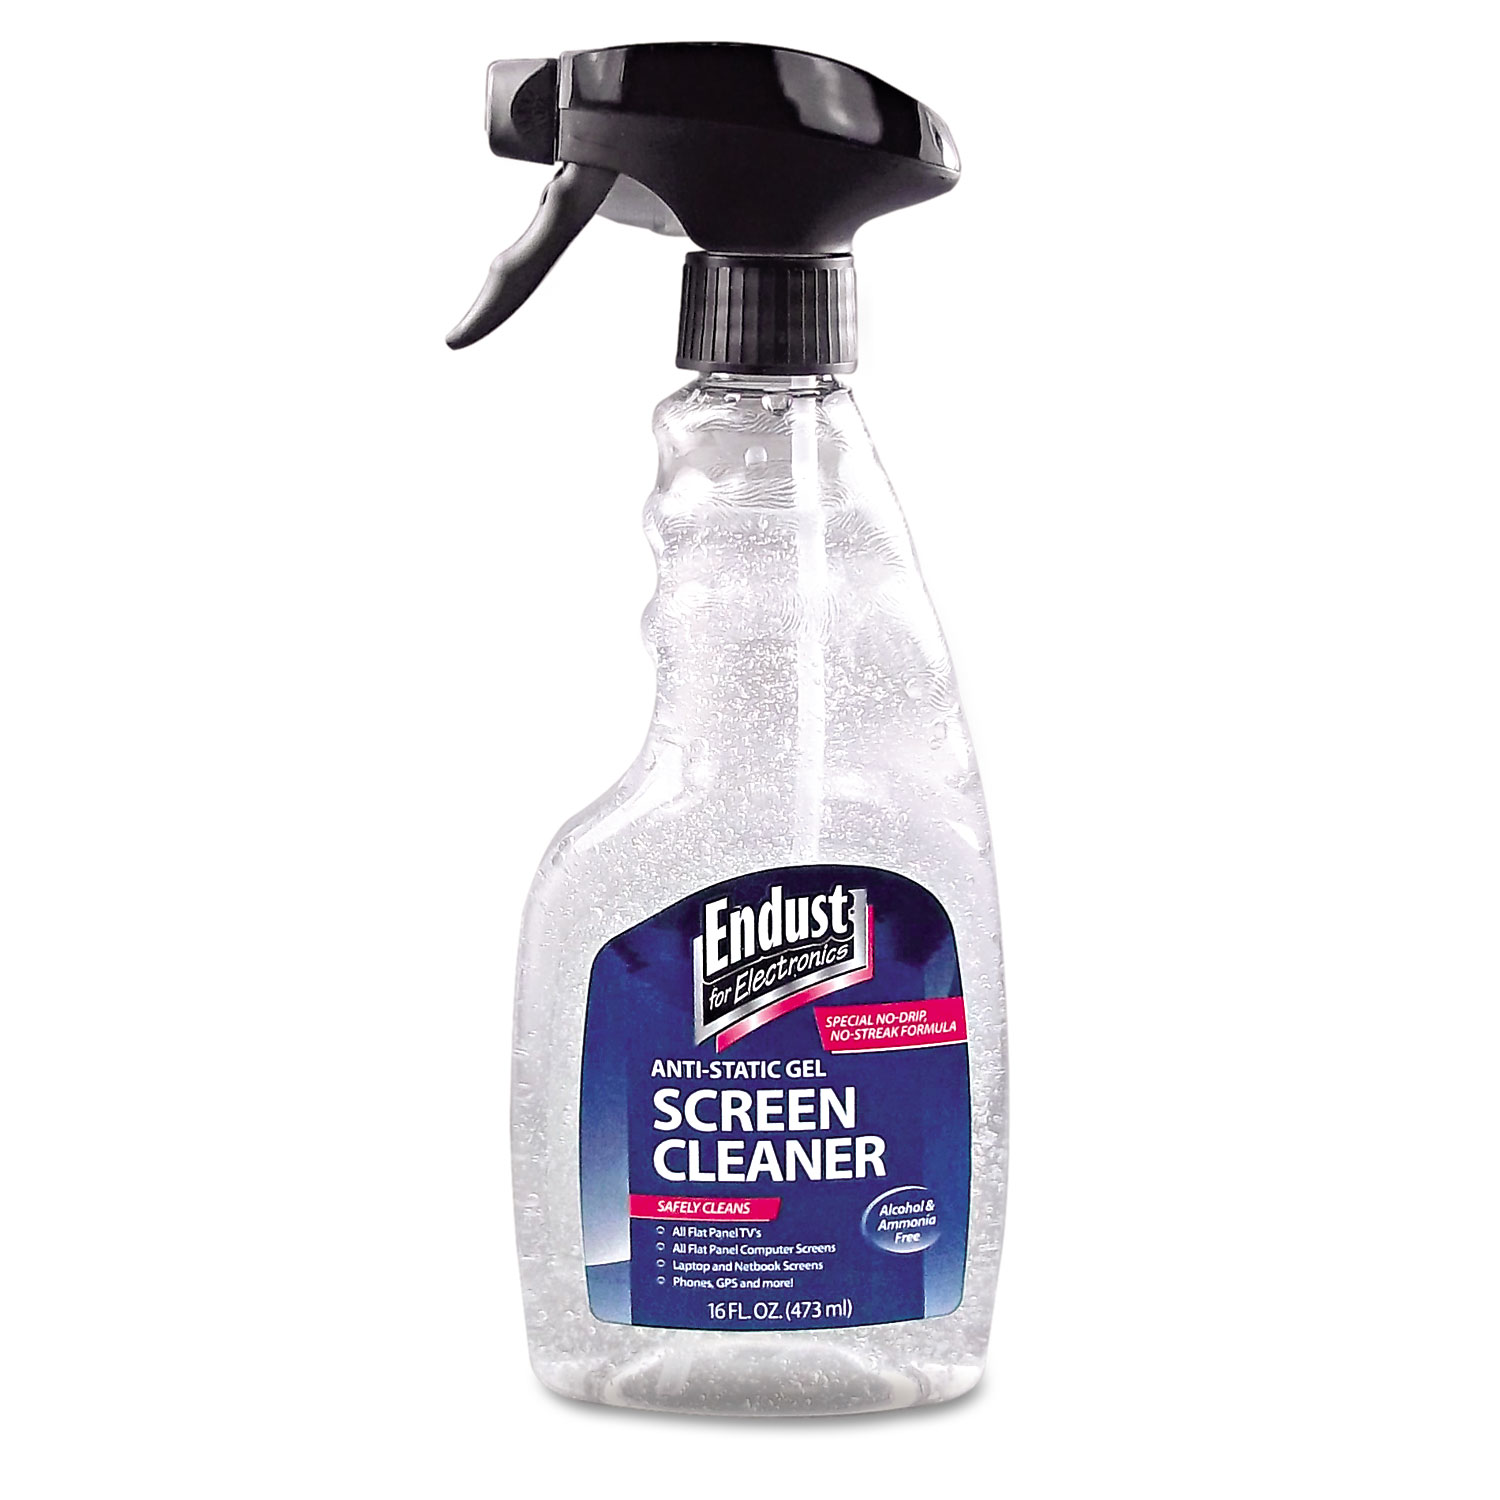  Endust for Electronics 11308 Cleaning Gel Spray for LCD/Plasma, 16oz, Pump Spray (END11308) 